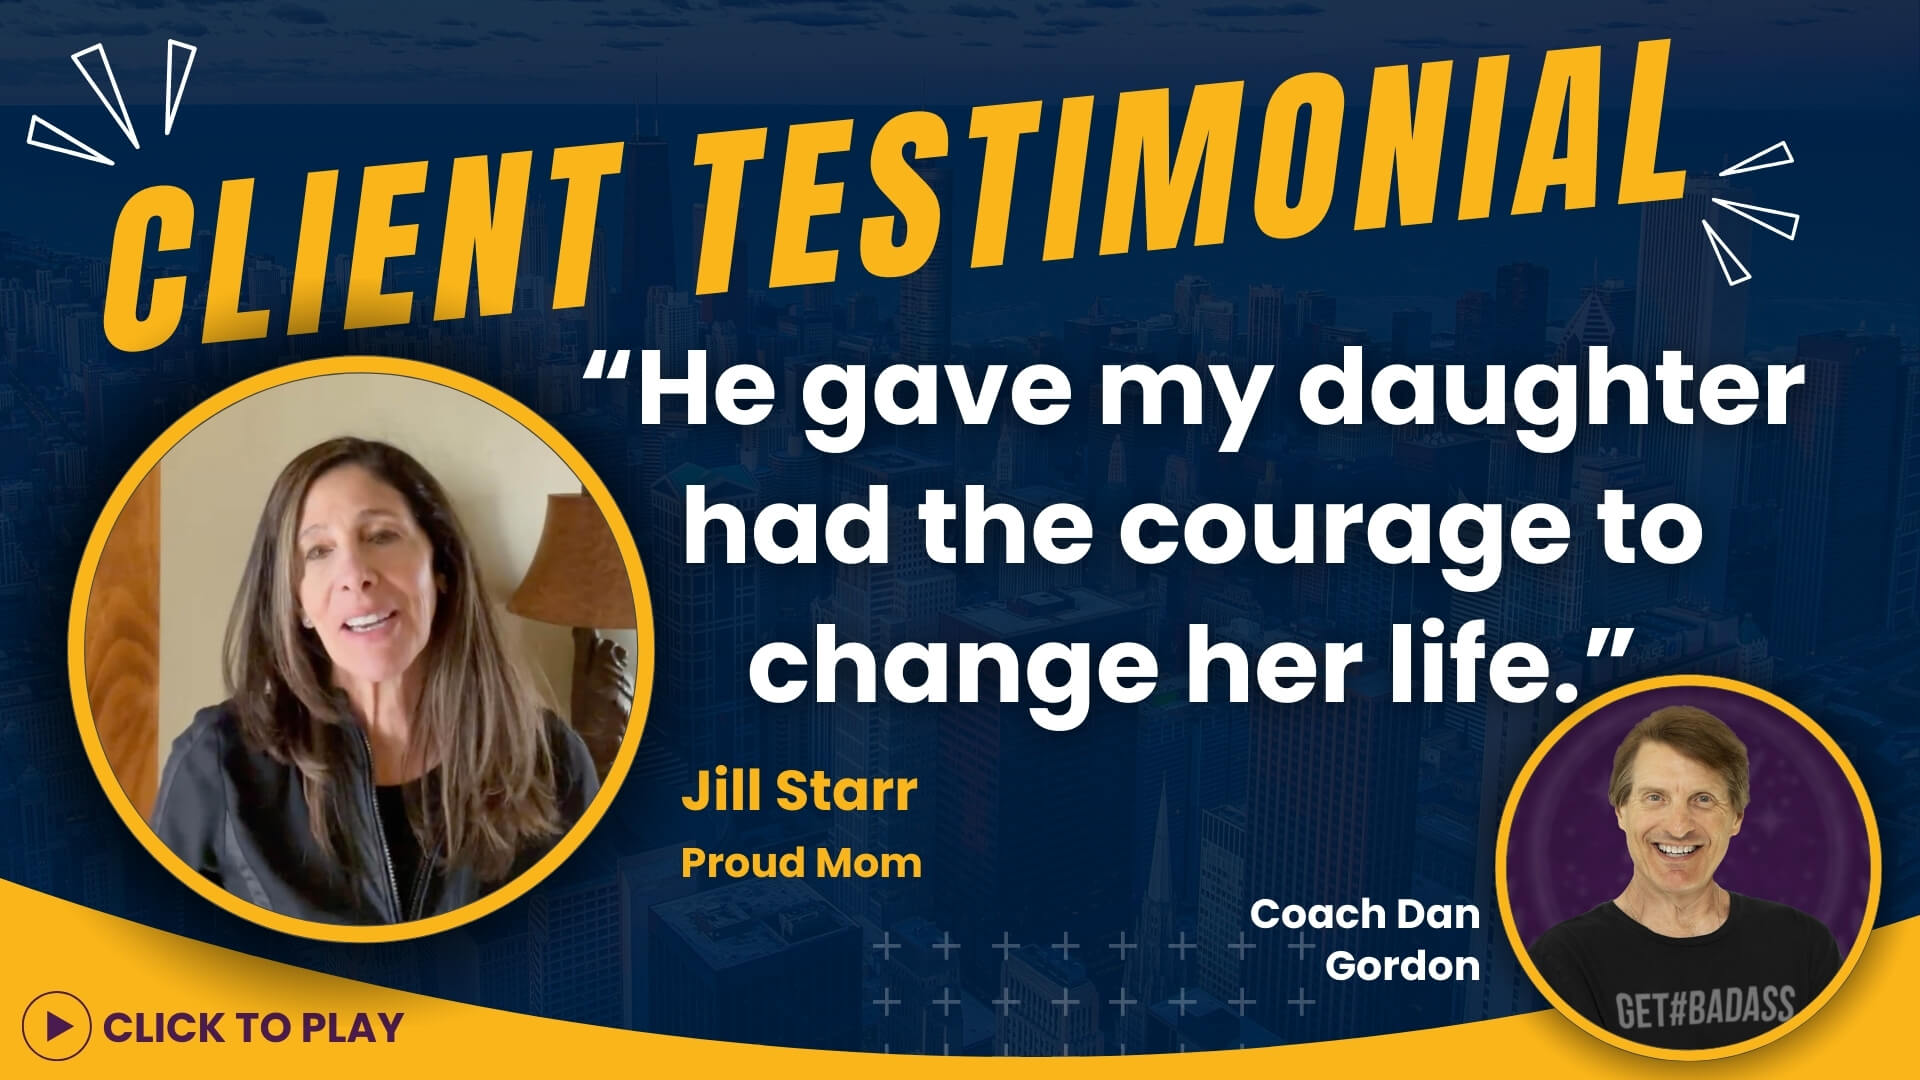 Jill Starr, identified as a proud mom, shares her testimonial on how Coach Dan Gordon inspired her daughter to change her life.